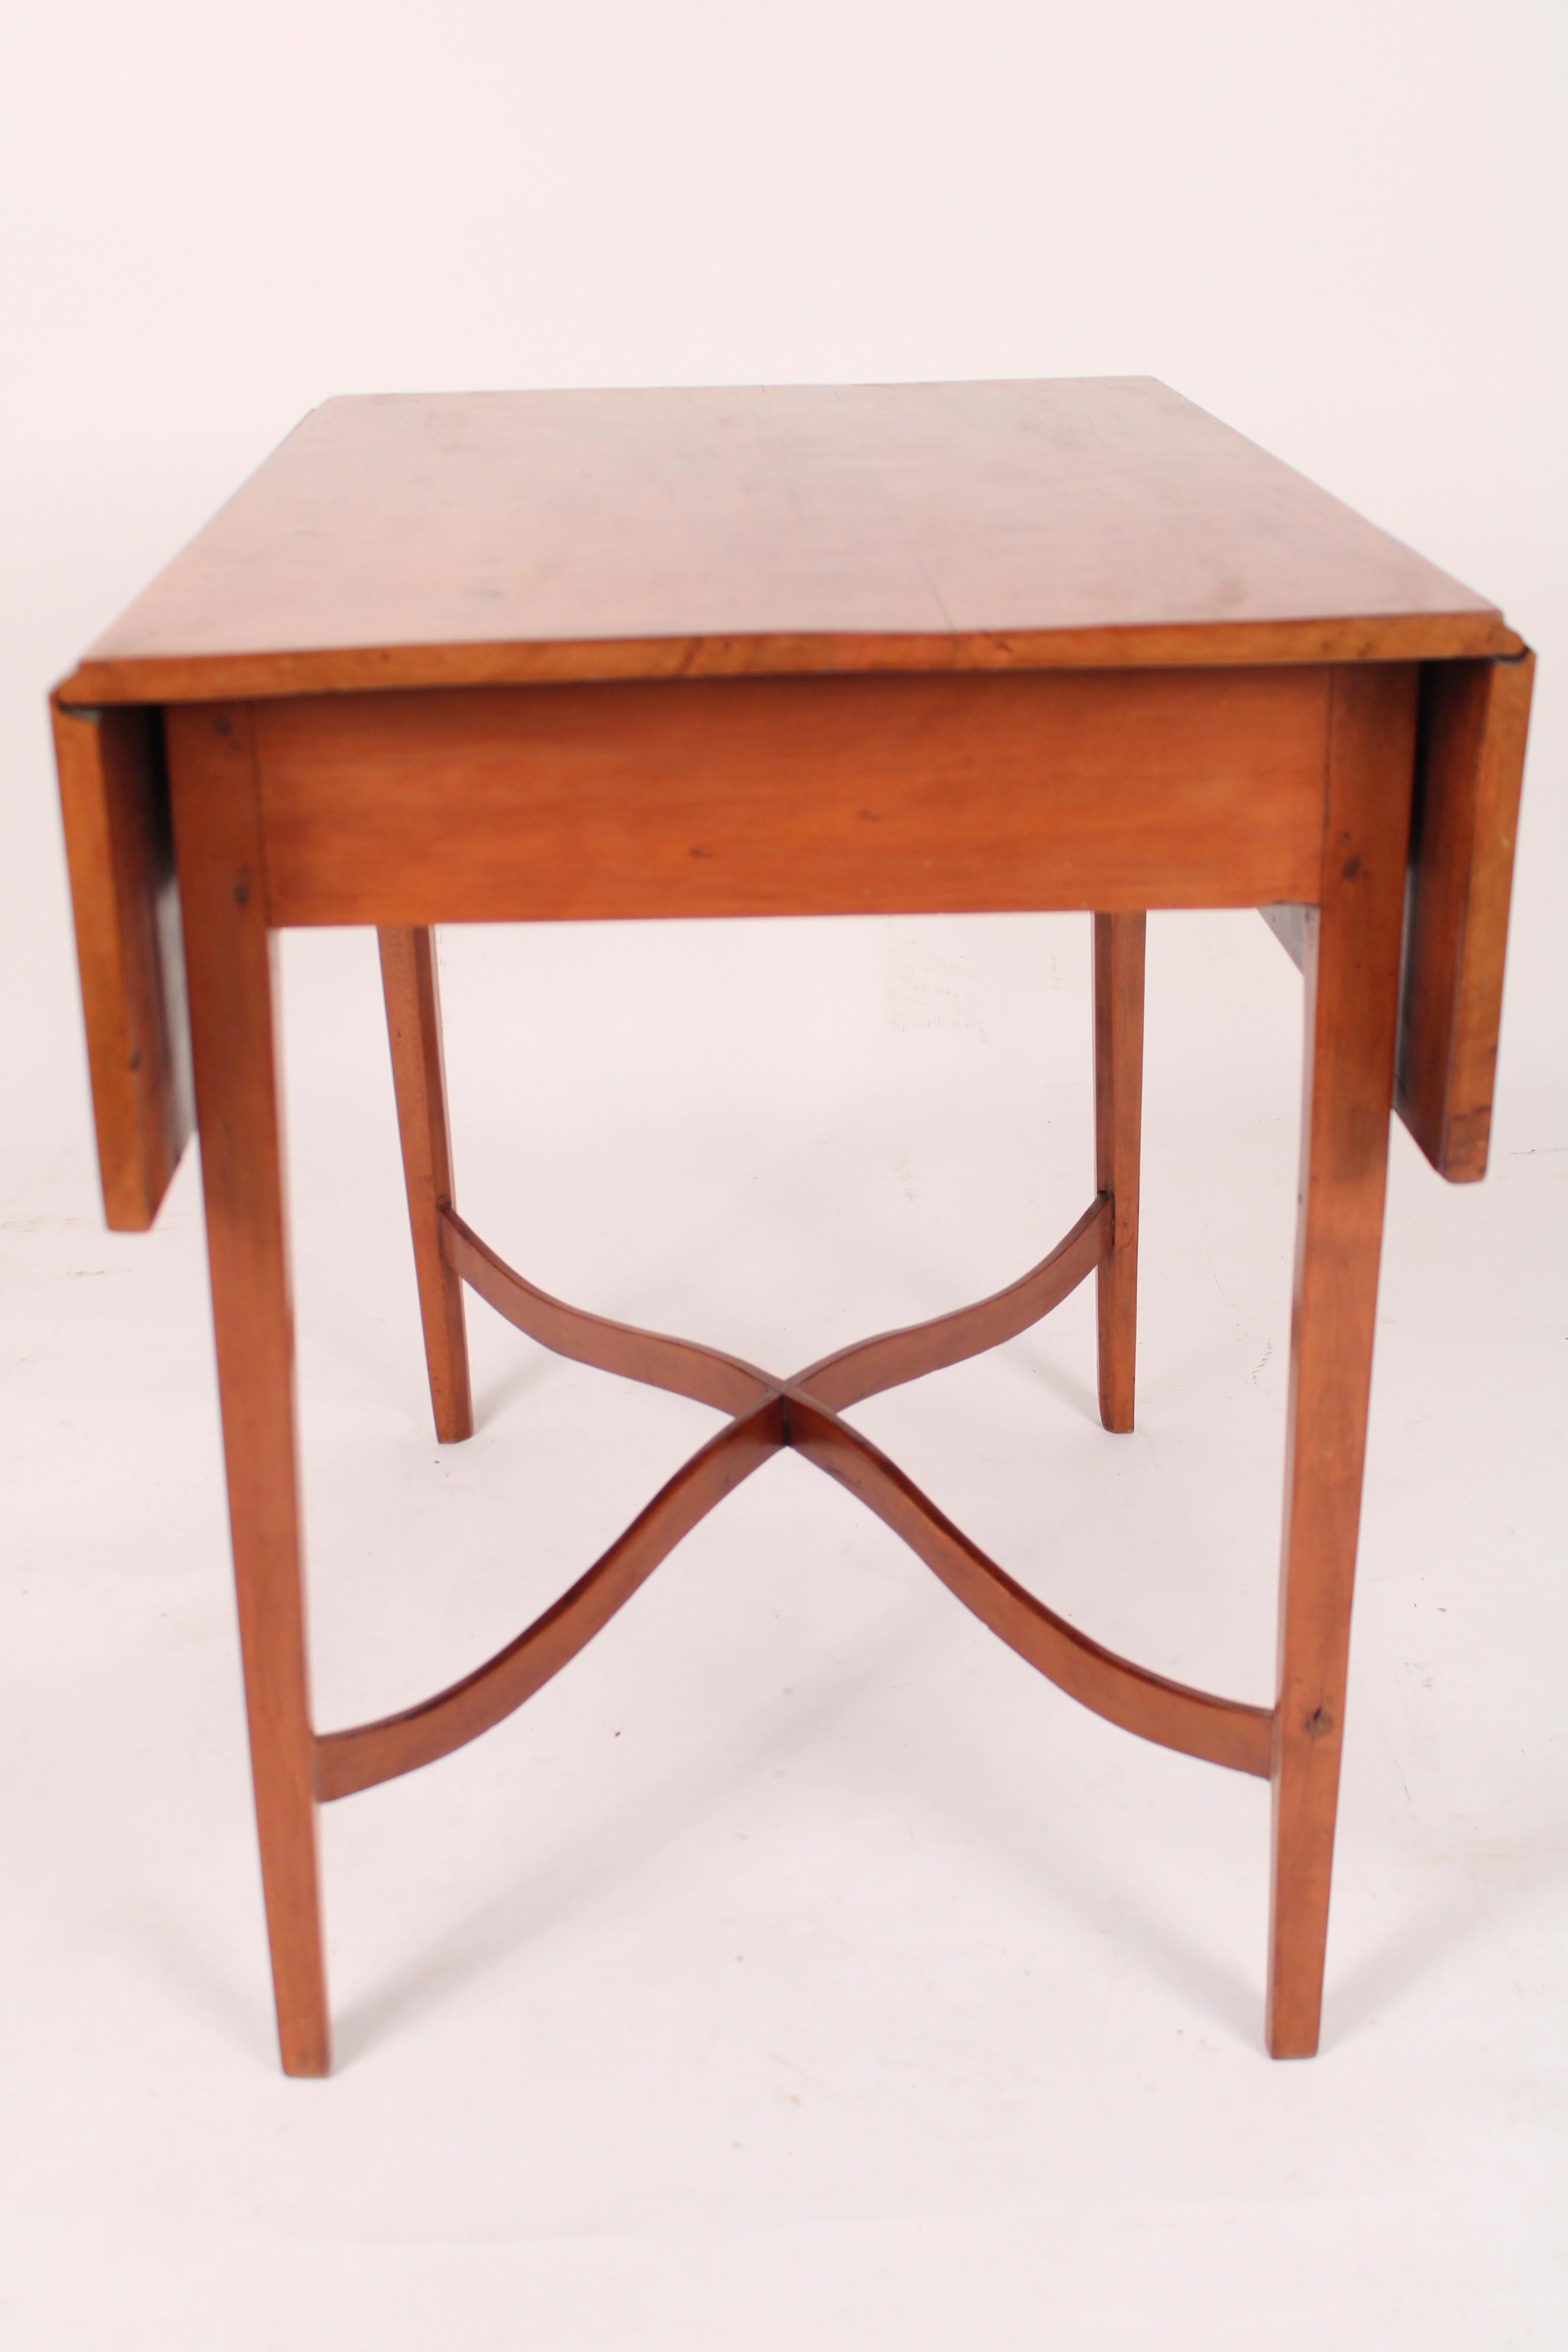 19th Century Antique American Federal Style Drop Leaf Table For Sale